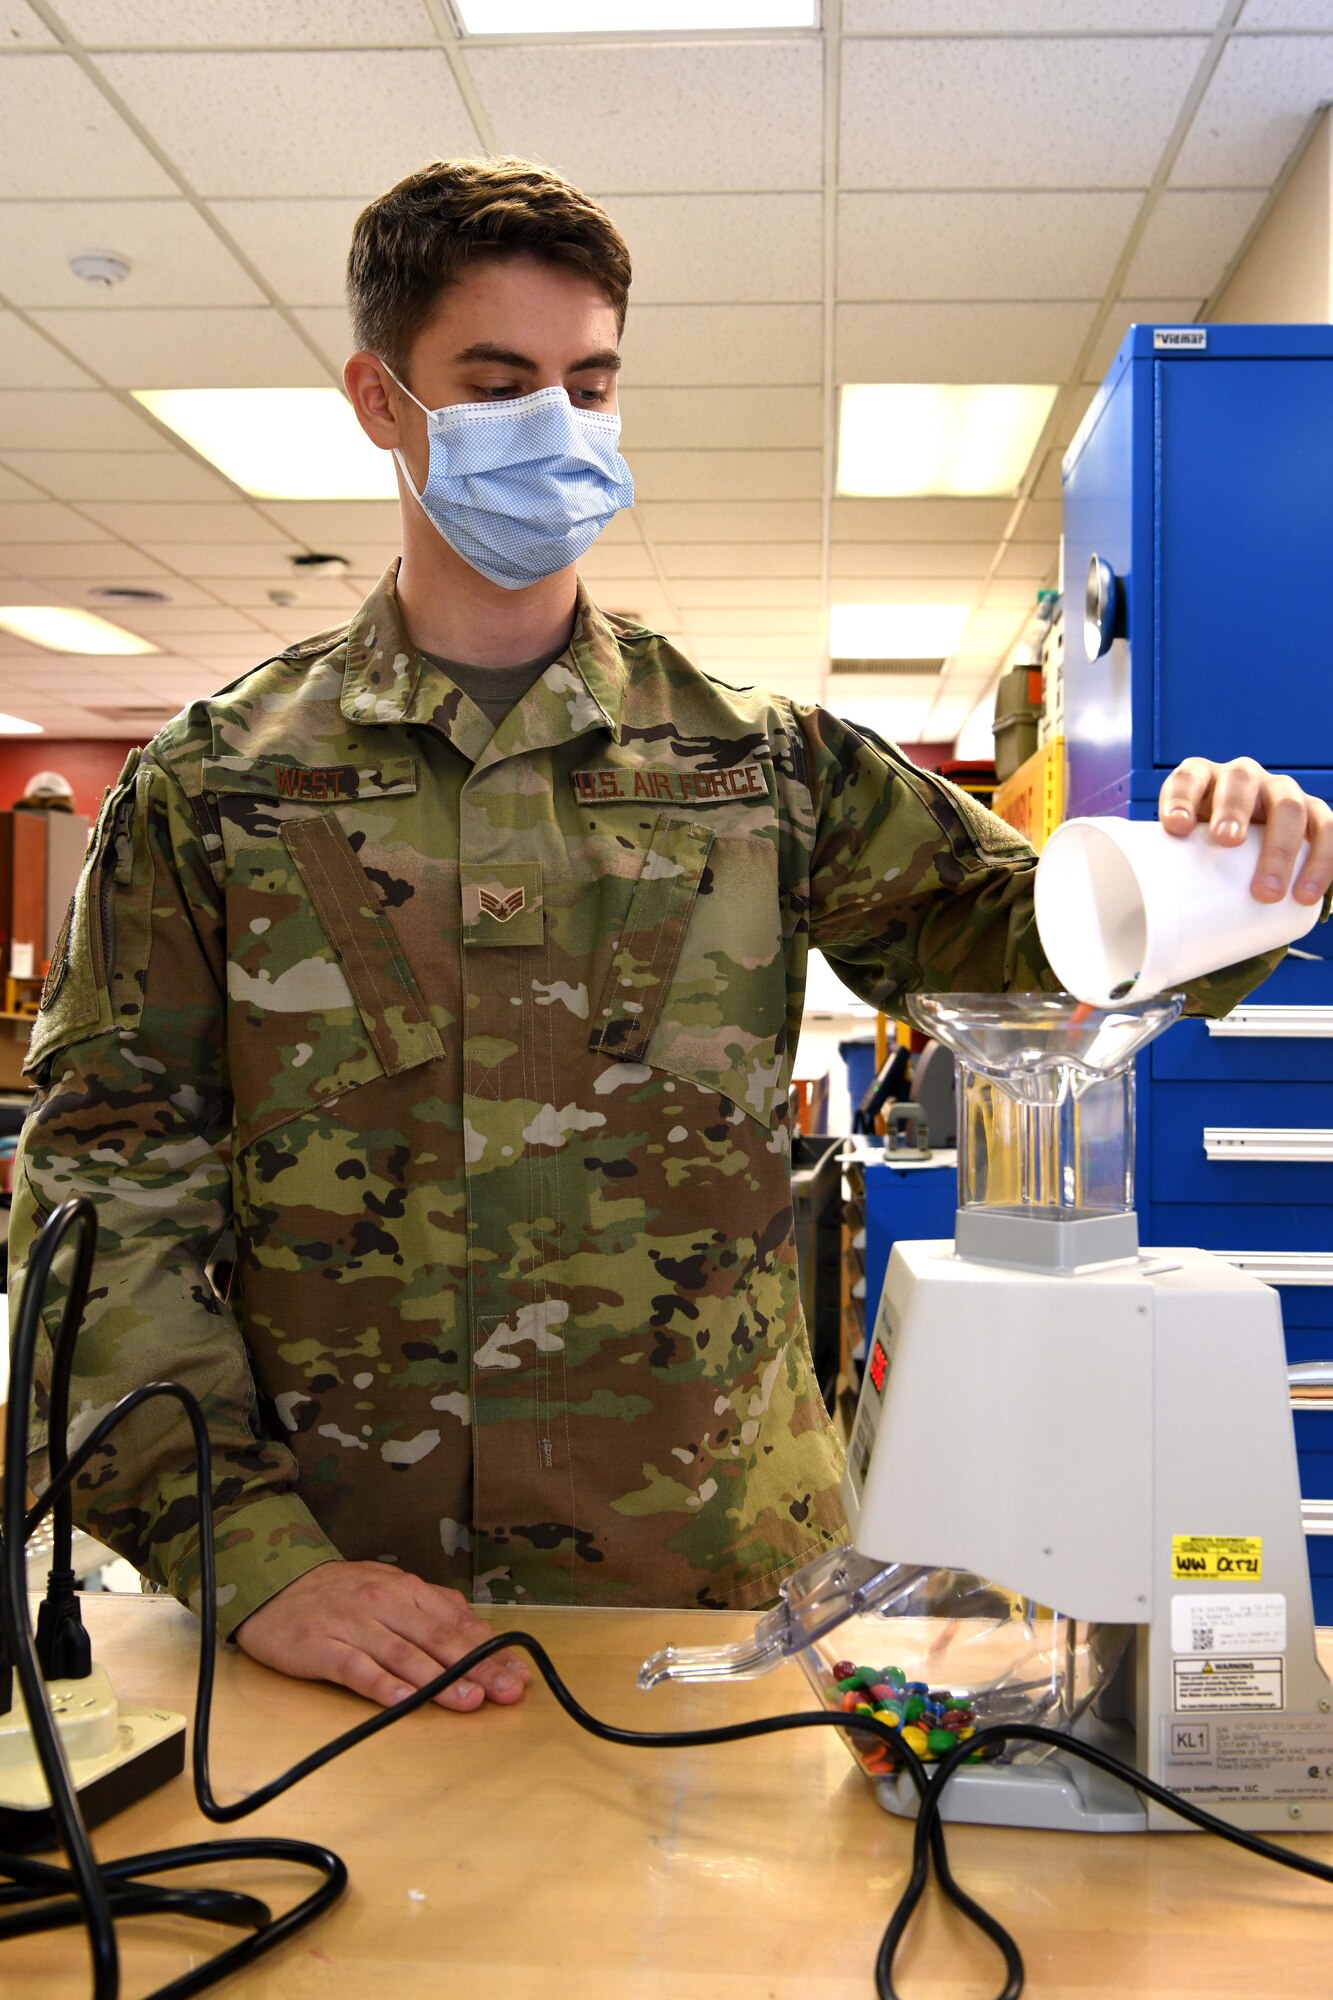 Luke Air Force Base, Ariz. – Senior Airman Gage West, 944th Aeromedical Staging Squadron biomedical technician, runs a sample item through a pill counter while inspecting the device at Luke Air Force Base, Ariz., Nov. 9, 2020. When checking the operability of the counter, the BMET Airmen use different samples varying in shapes and sizes to ensure the machine’s shape modes count them accurately.